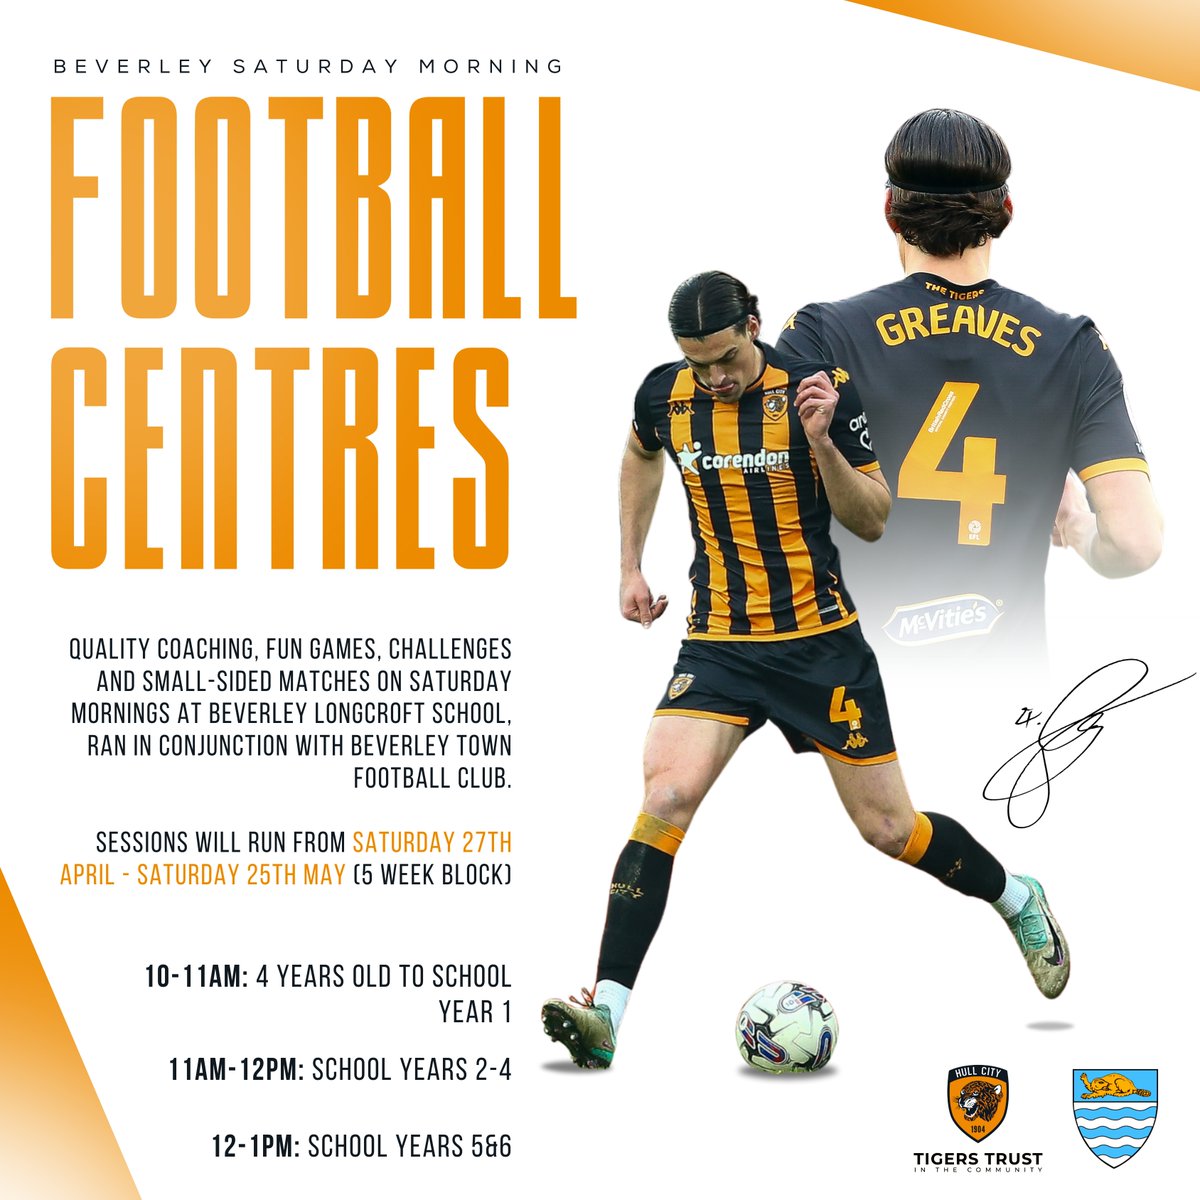 Our new block of Saturday Morning Football Centres starts this 𝗦𝗔𝗧𝗨𝗥𝗗𝗔𝗬! Enjoy Saturday mornings at Beverley Longcroft School with games, challenges & matches for kids aged 4 to School Years 5&6, in partnership with @bevtownfc! 👉 Book Now: shorturl.at/iuFIU